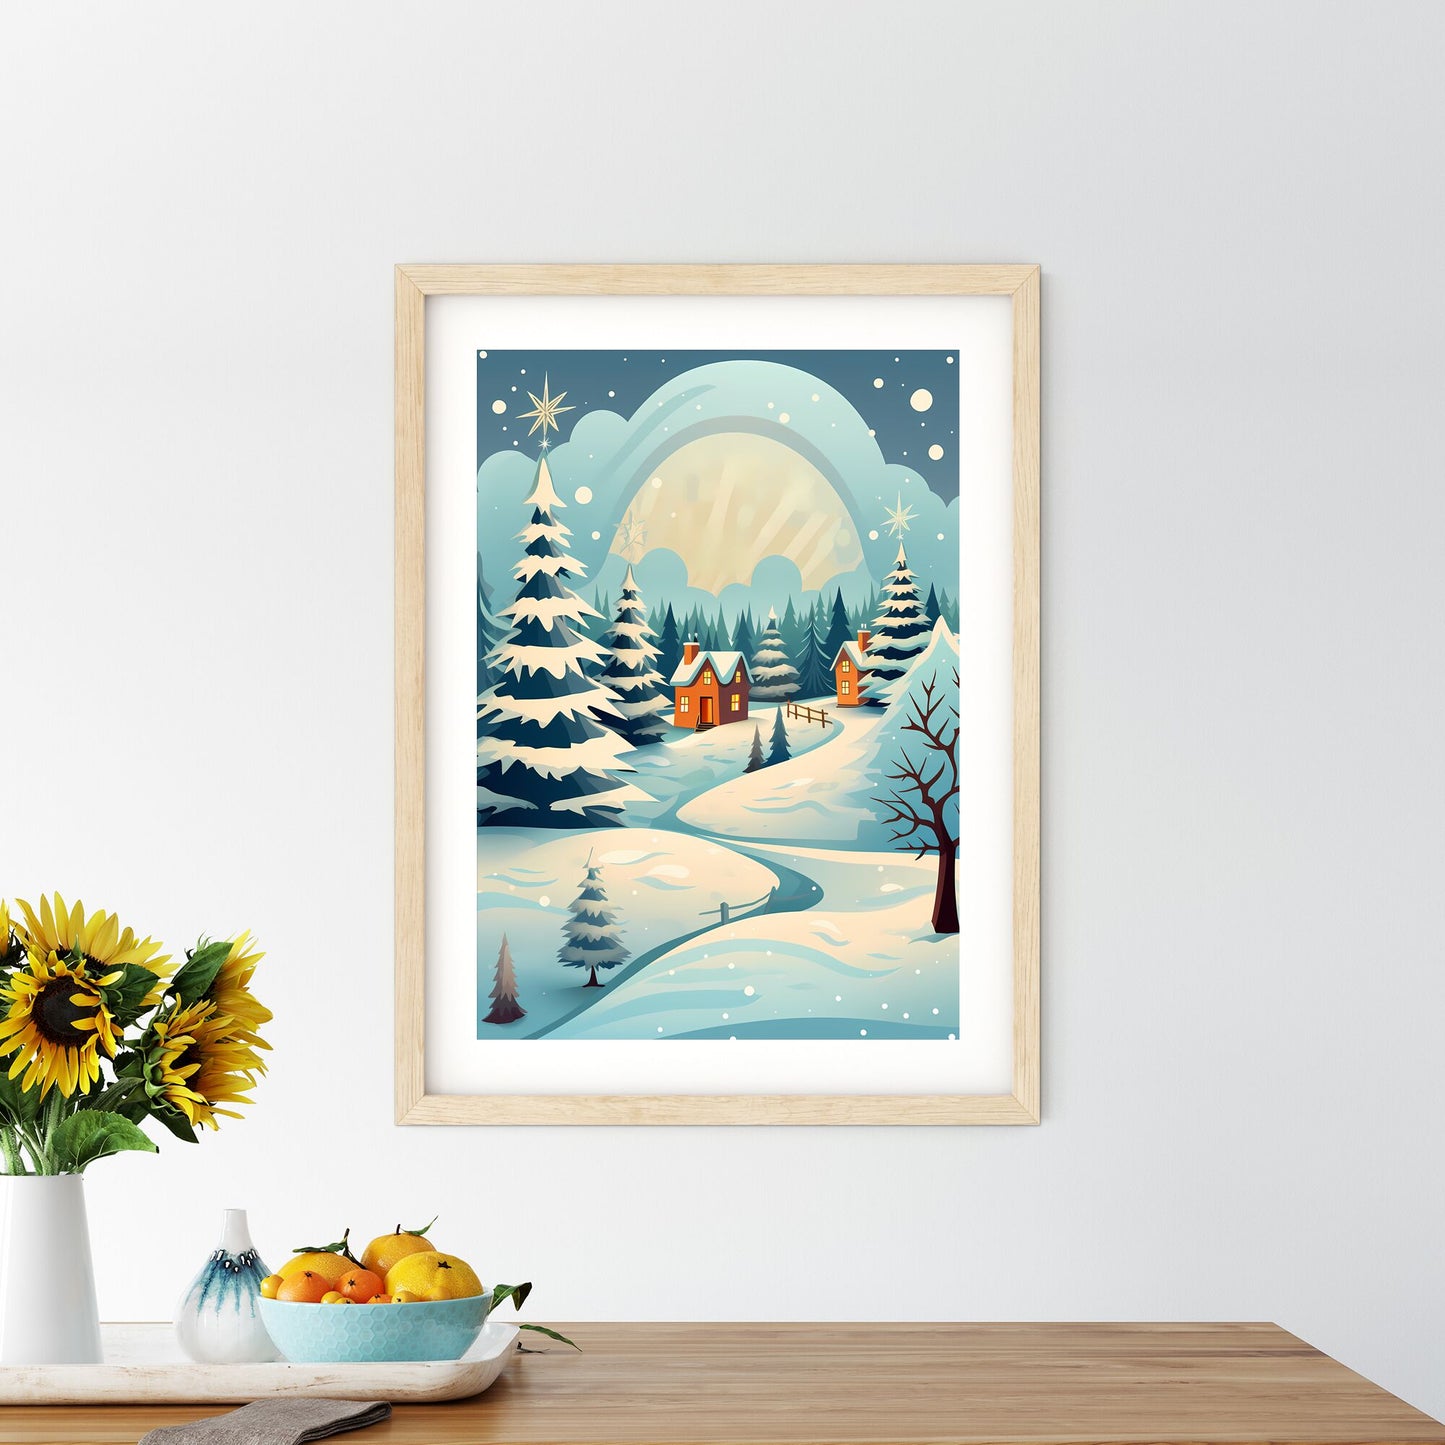 Snowy Landscape With Houses And Trees Art Print Default Title